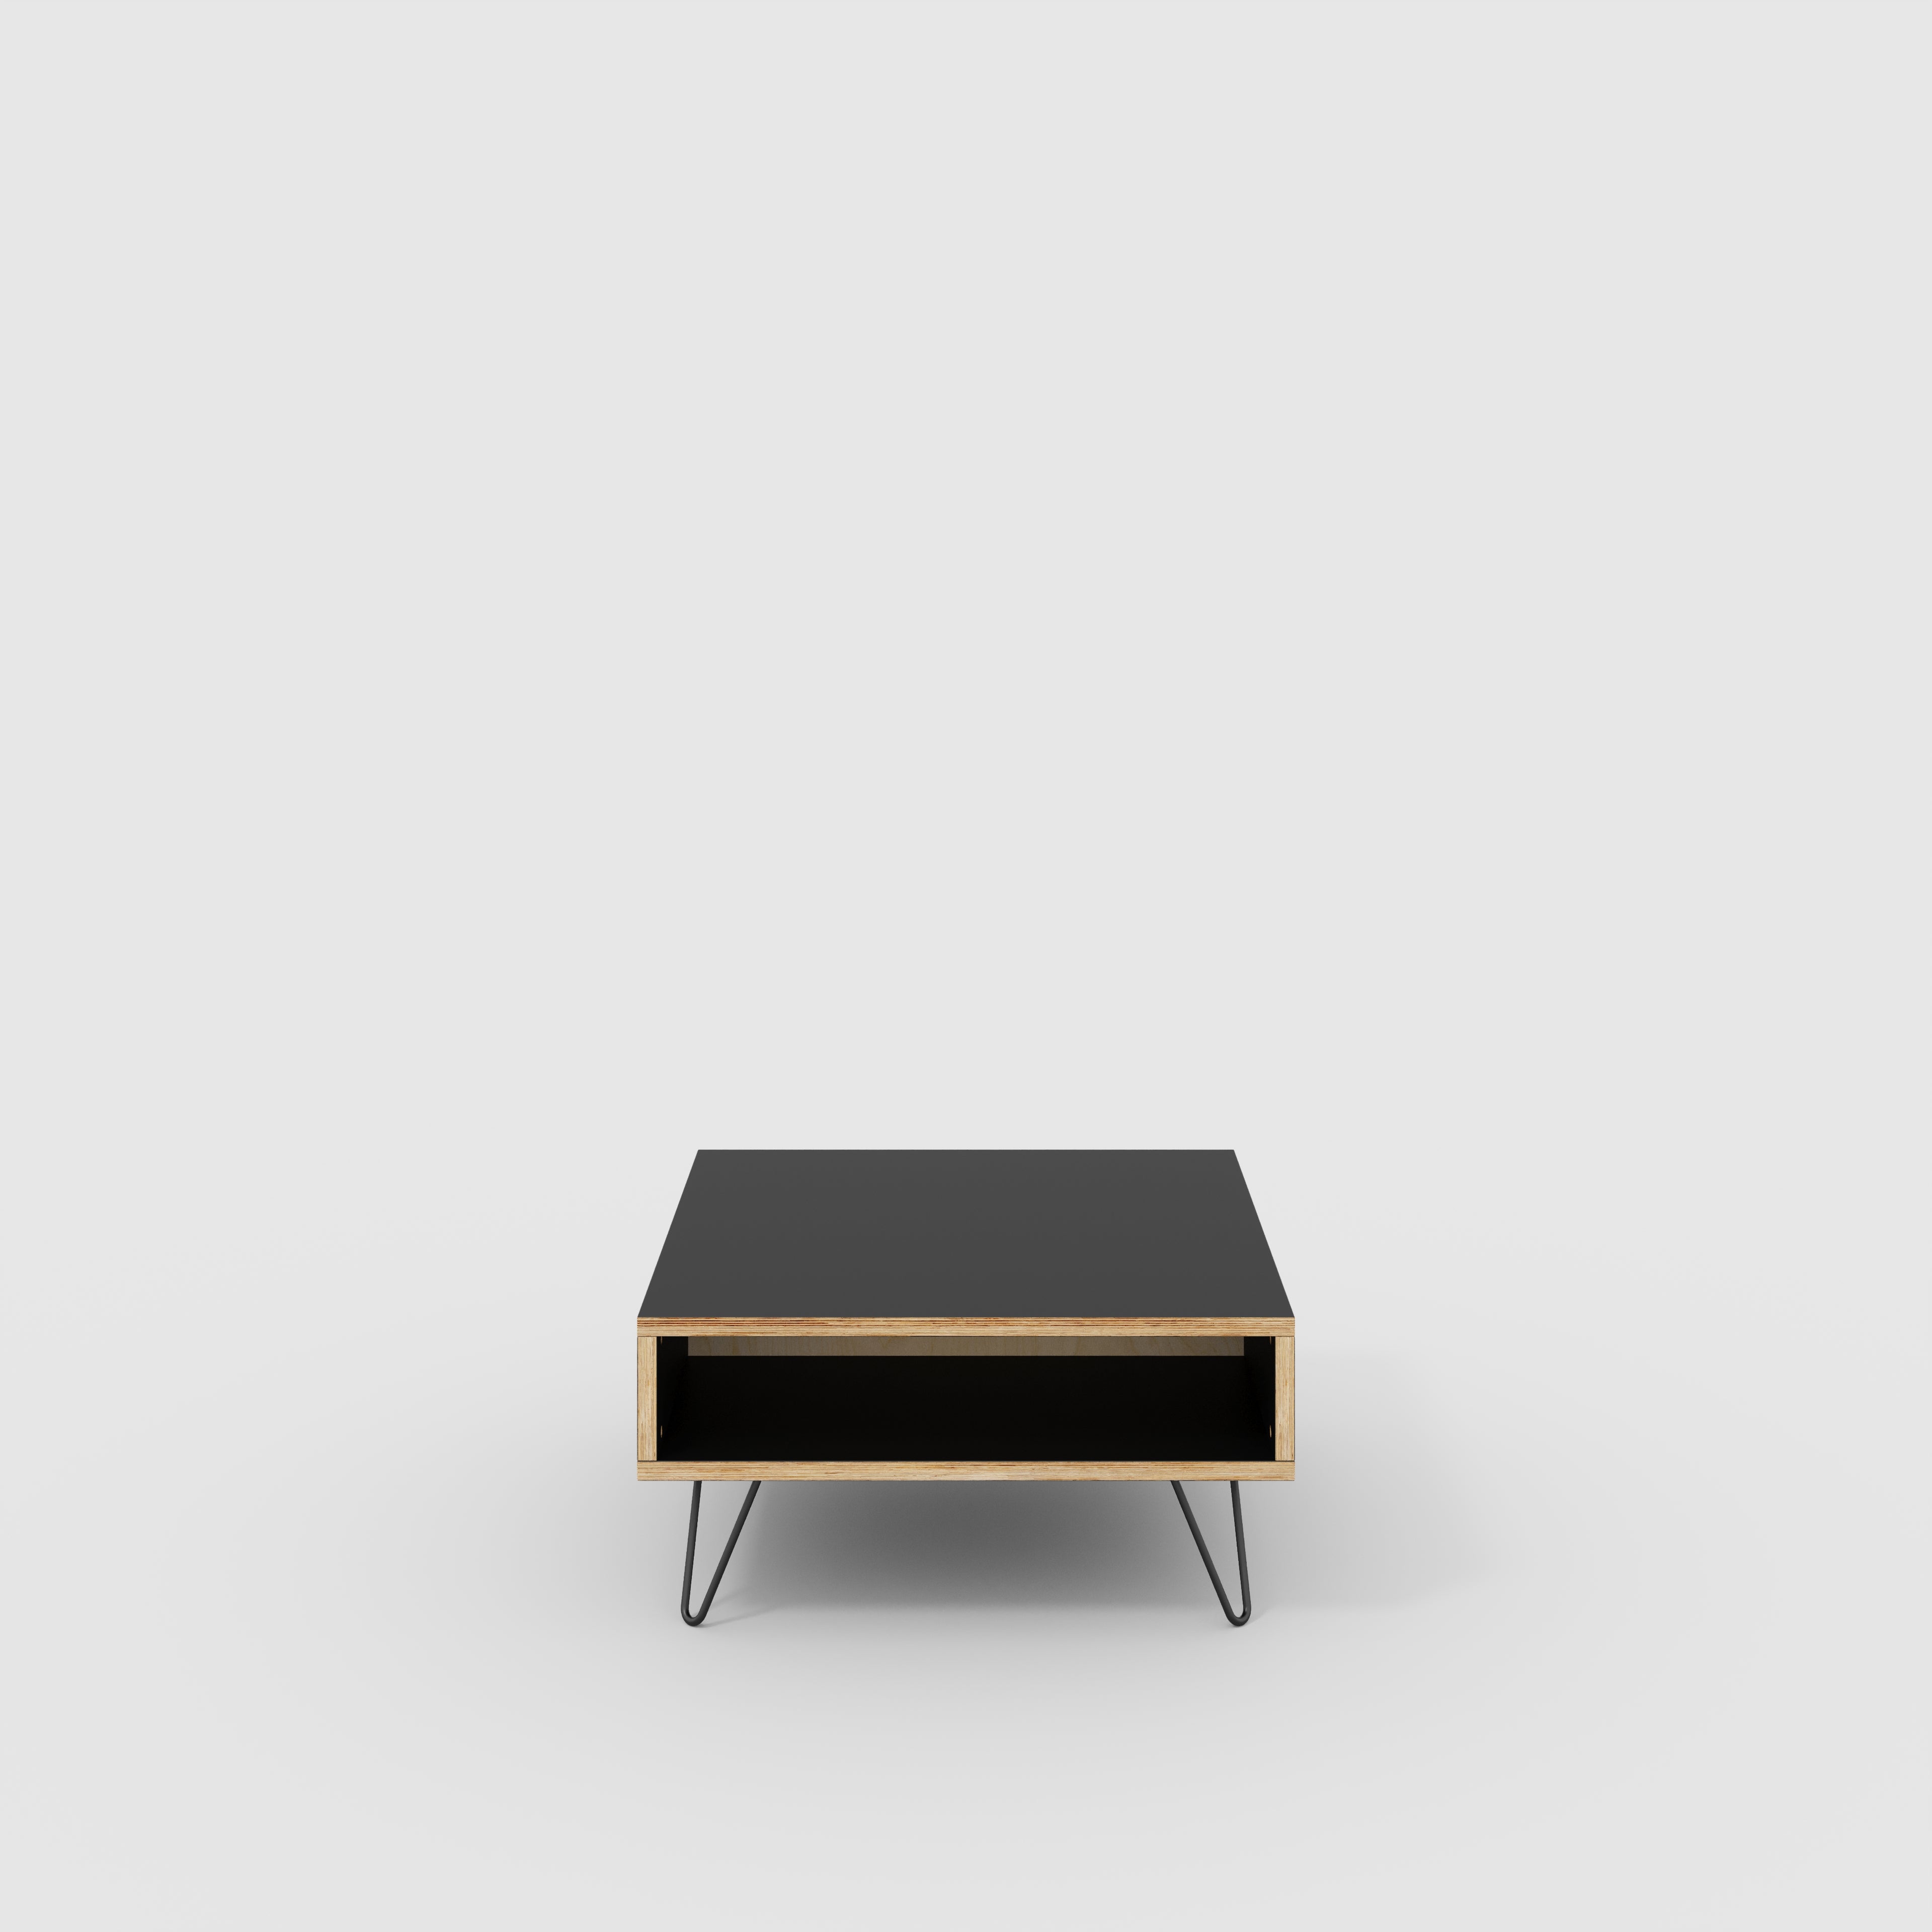 Coffee Table with Box Storage and Black Hairpin Legs - Formica Diamond Black - 800(w) x 800(d) x 400(h)